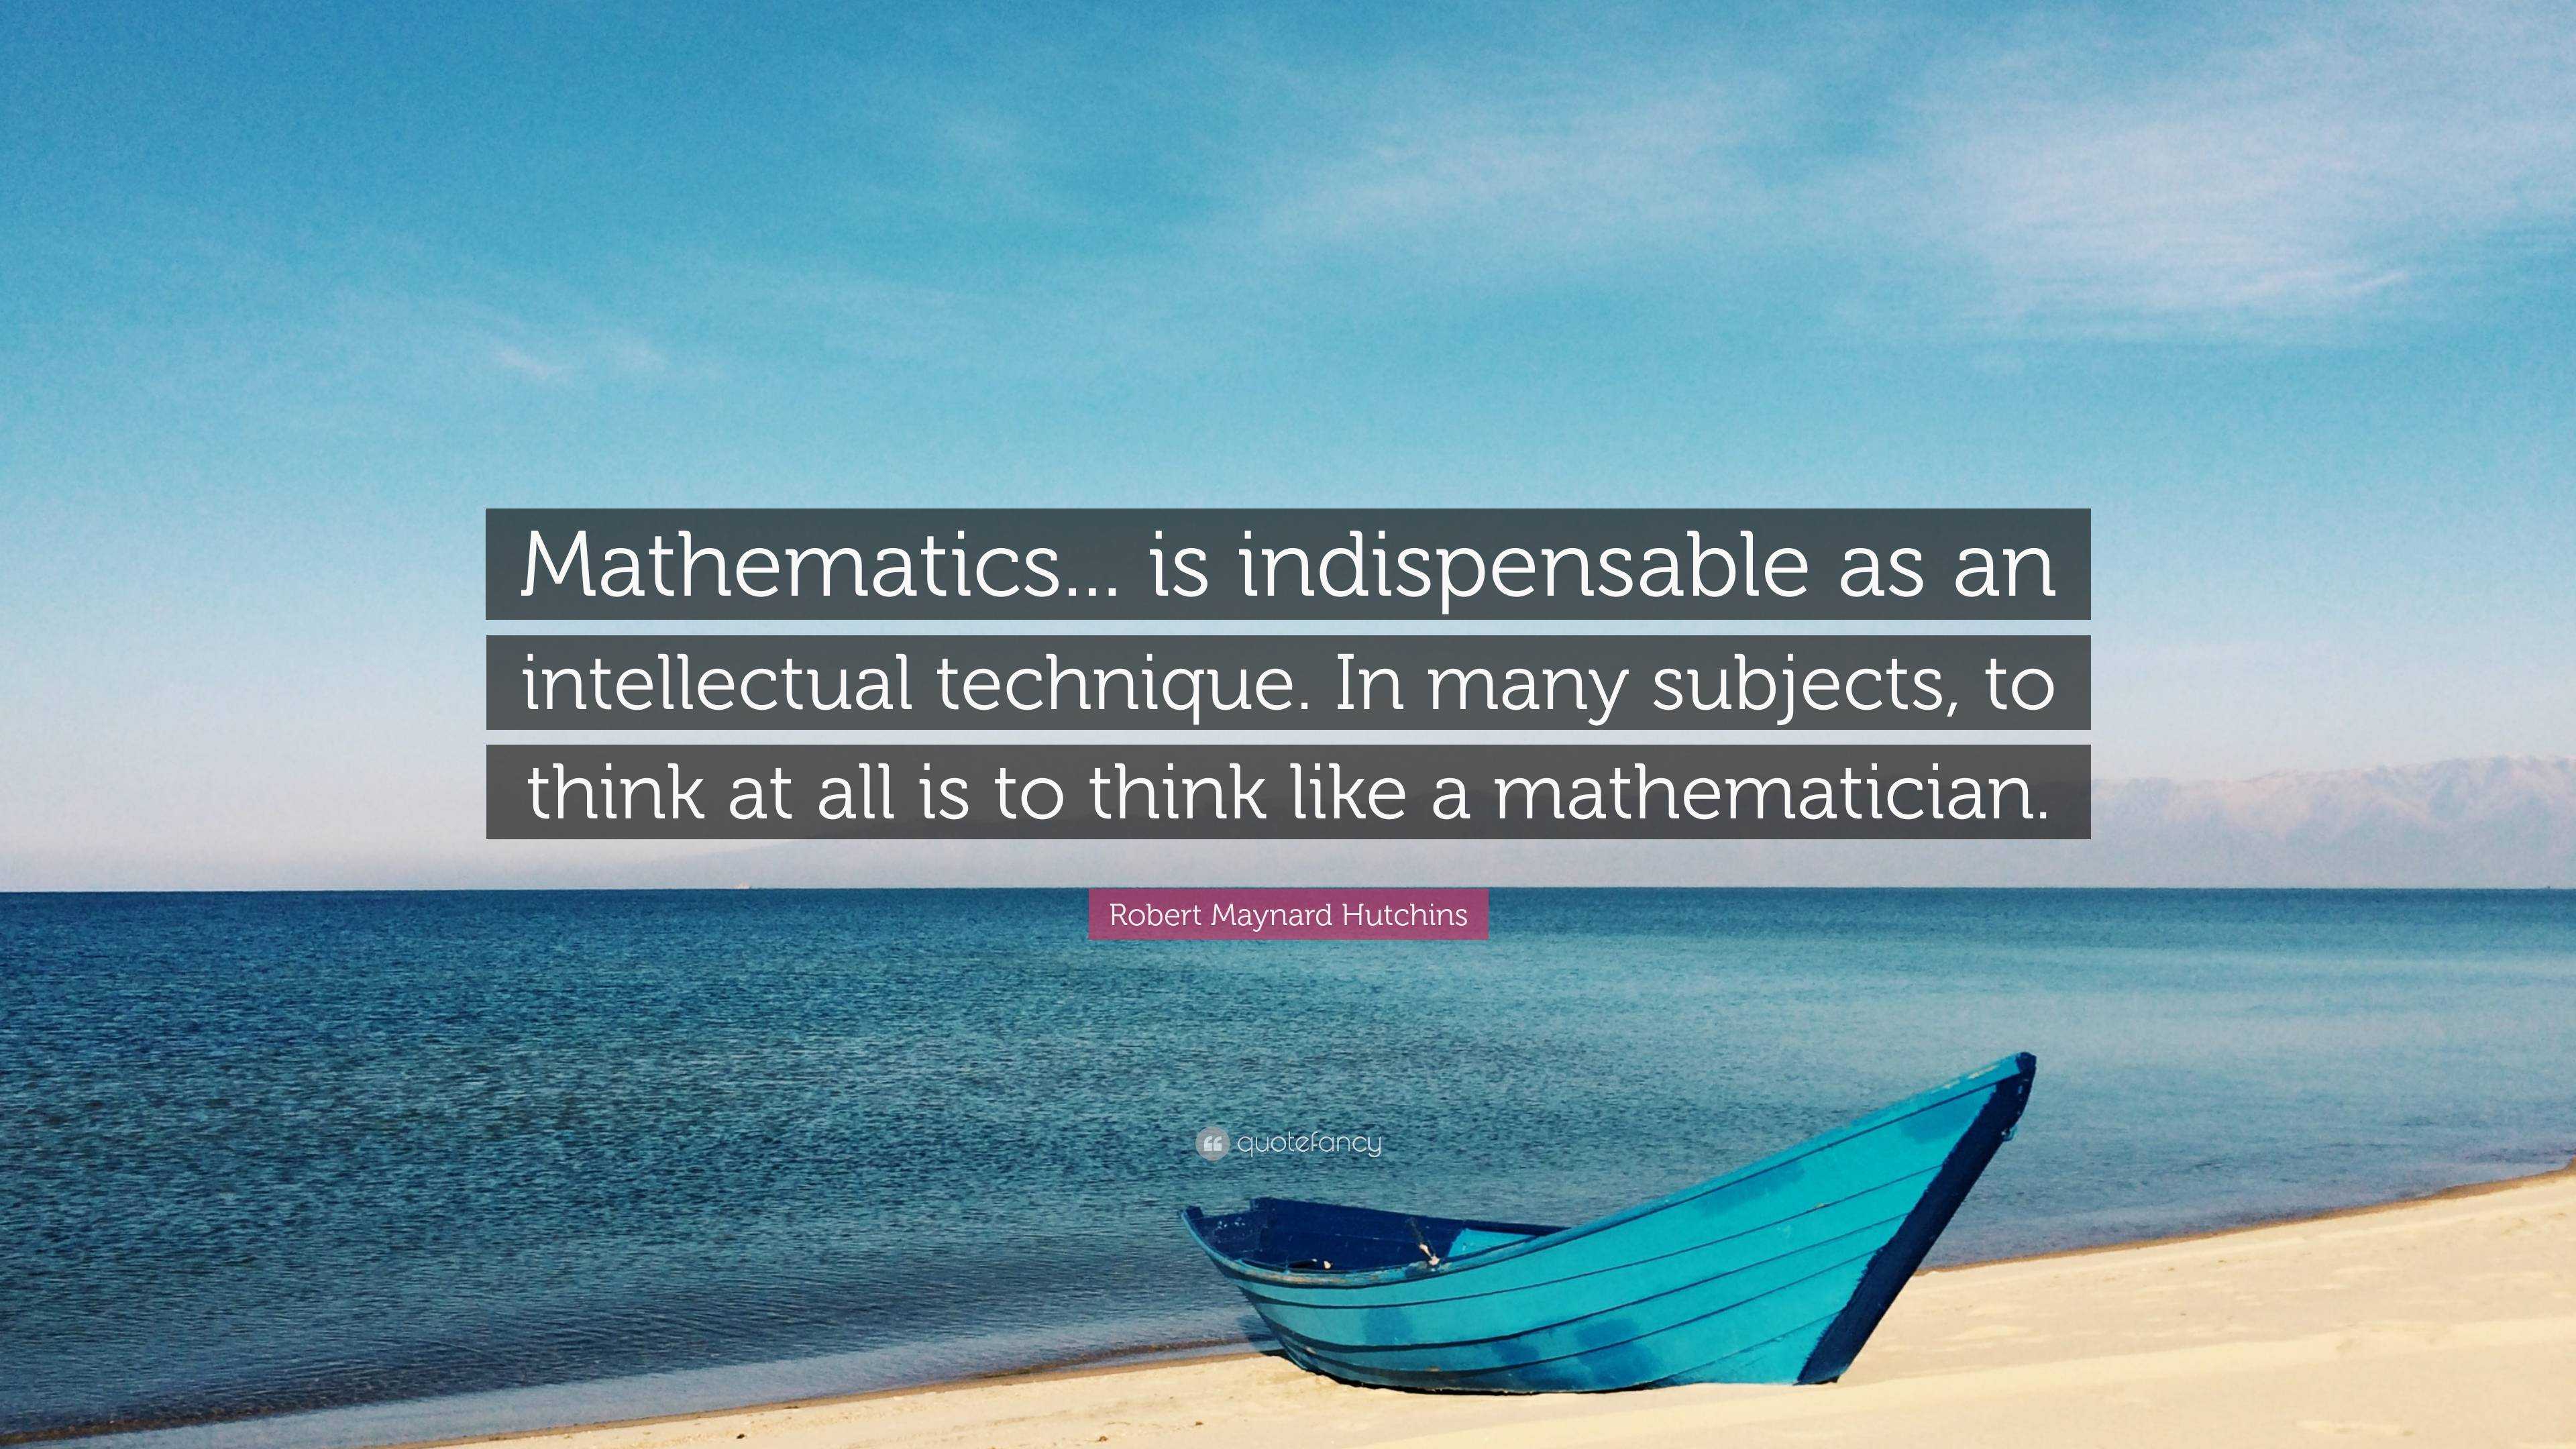 essay about mathematics is indispensable